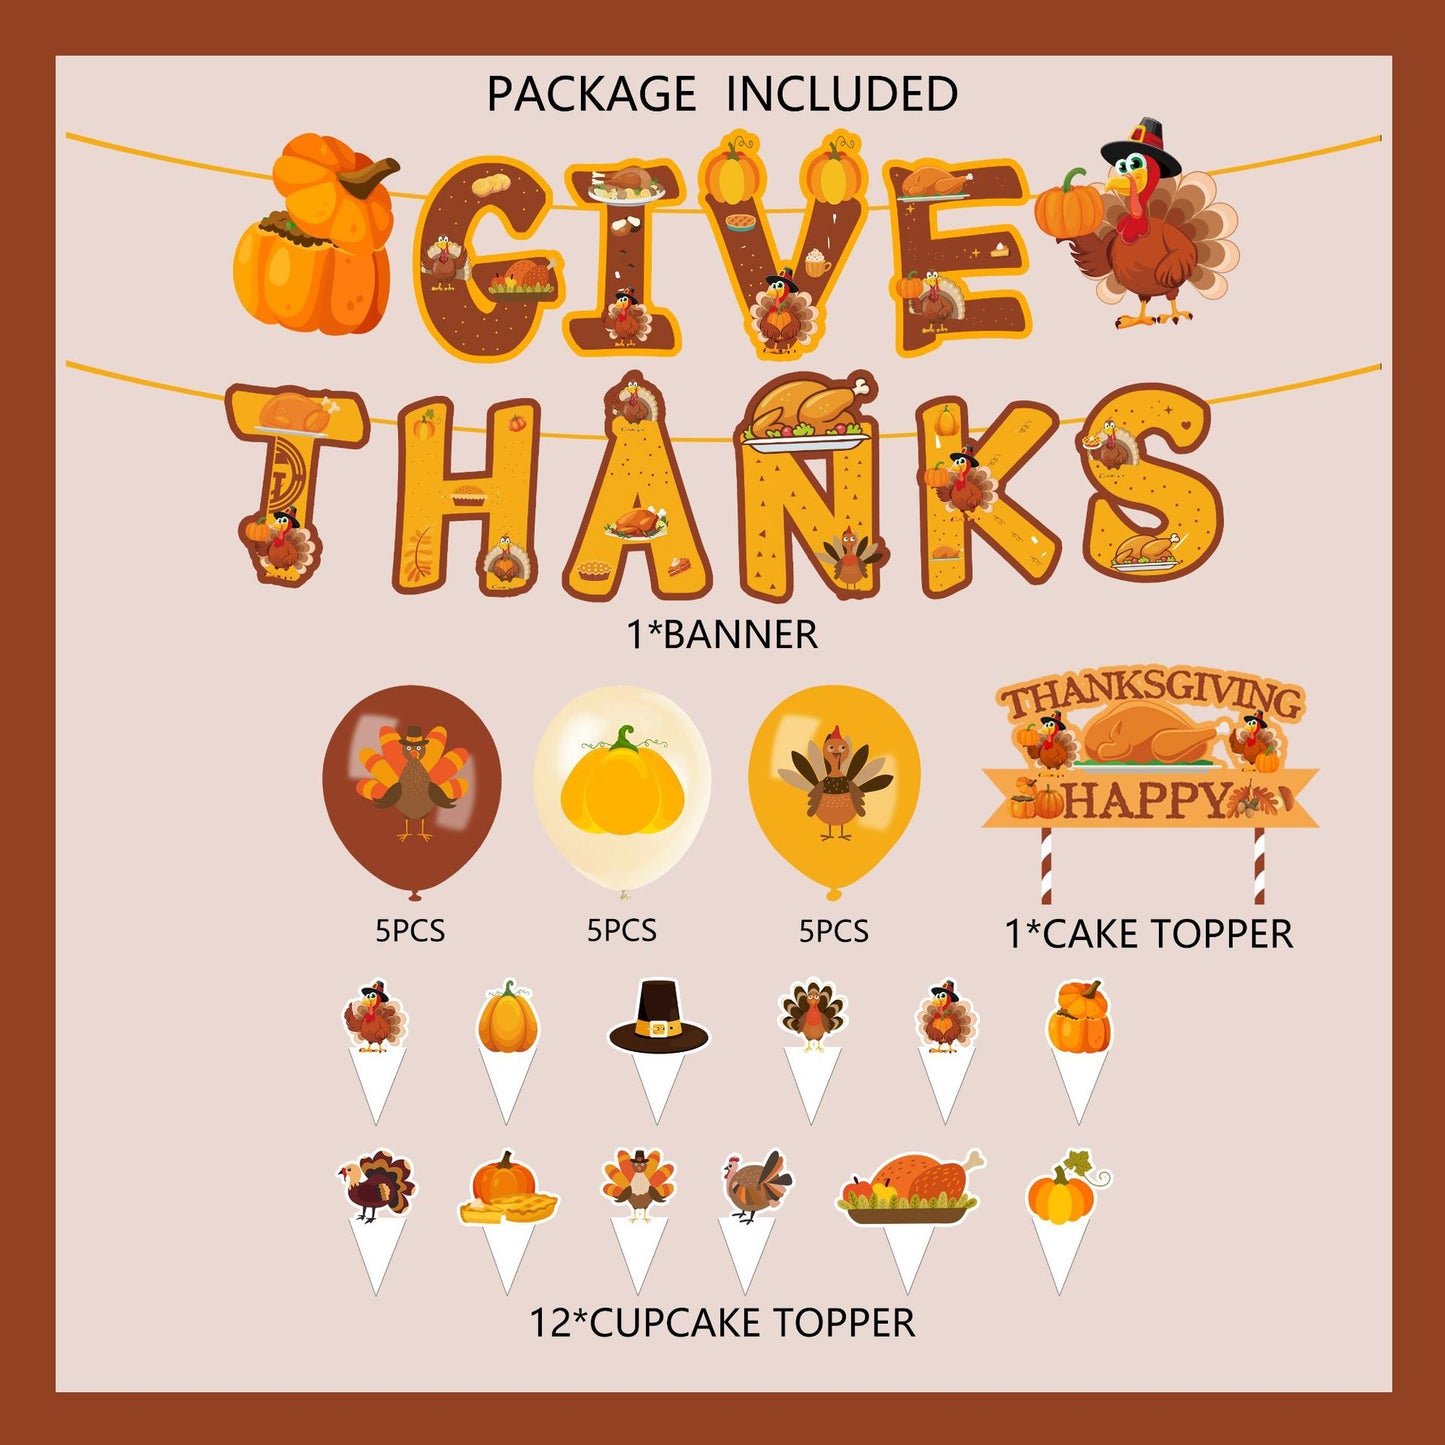 Thanksgiving Cake Topper "THANKS GIVE" Theme Party Gathering Banner Balloon Bunting Set